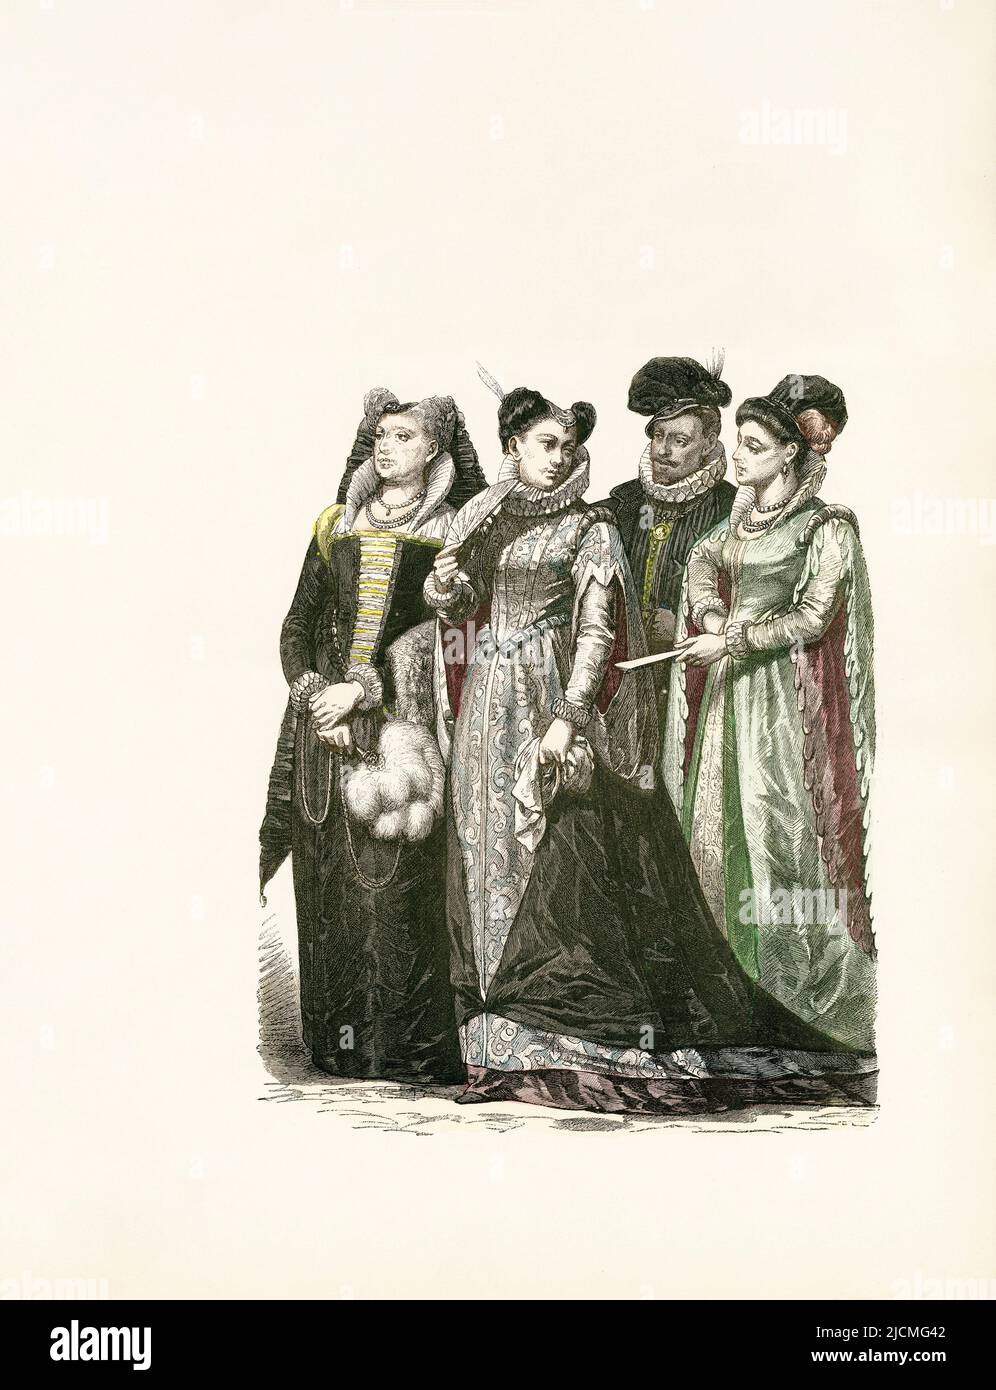 Women and Man from Venice, Milan, Florence, Italy, 1583, Illustration, The History of Costume, Braun & Schneider, Munich, Germany, 1861-1880 Stock Photo